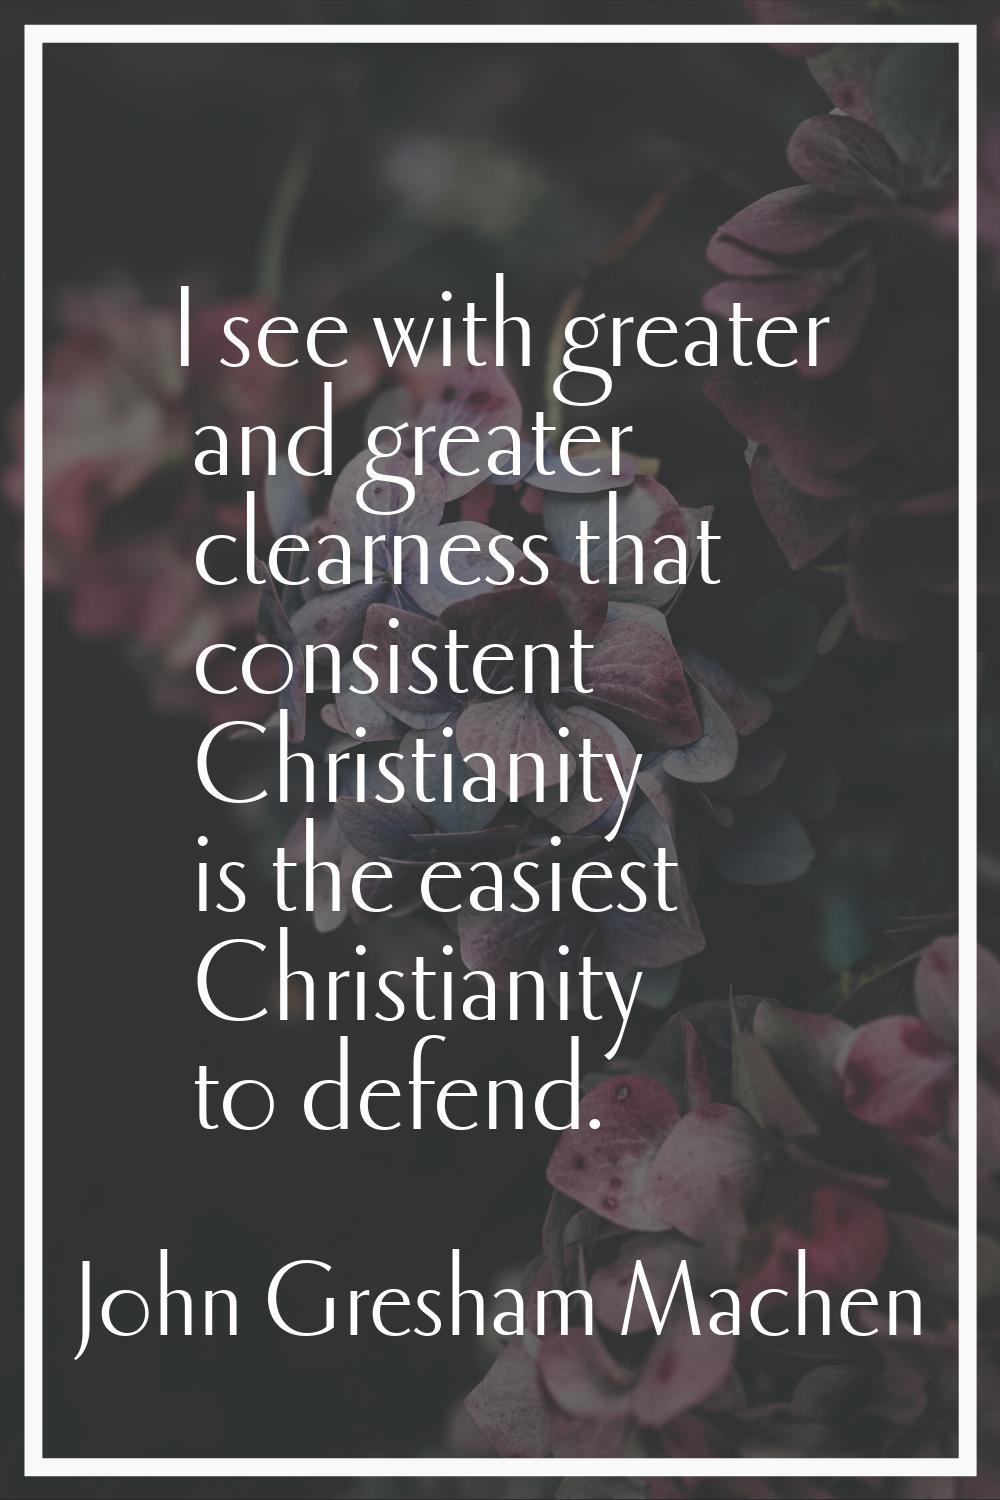 I see with greater and greater clearness that consistent Christianity is the easiest Christianity t